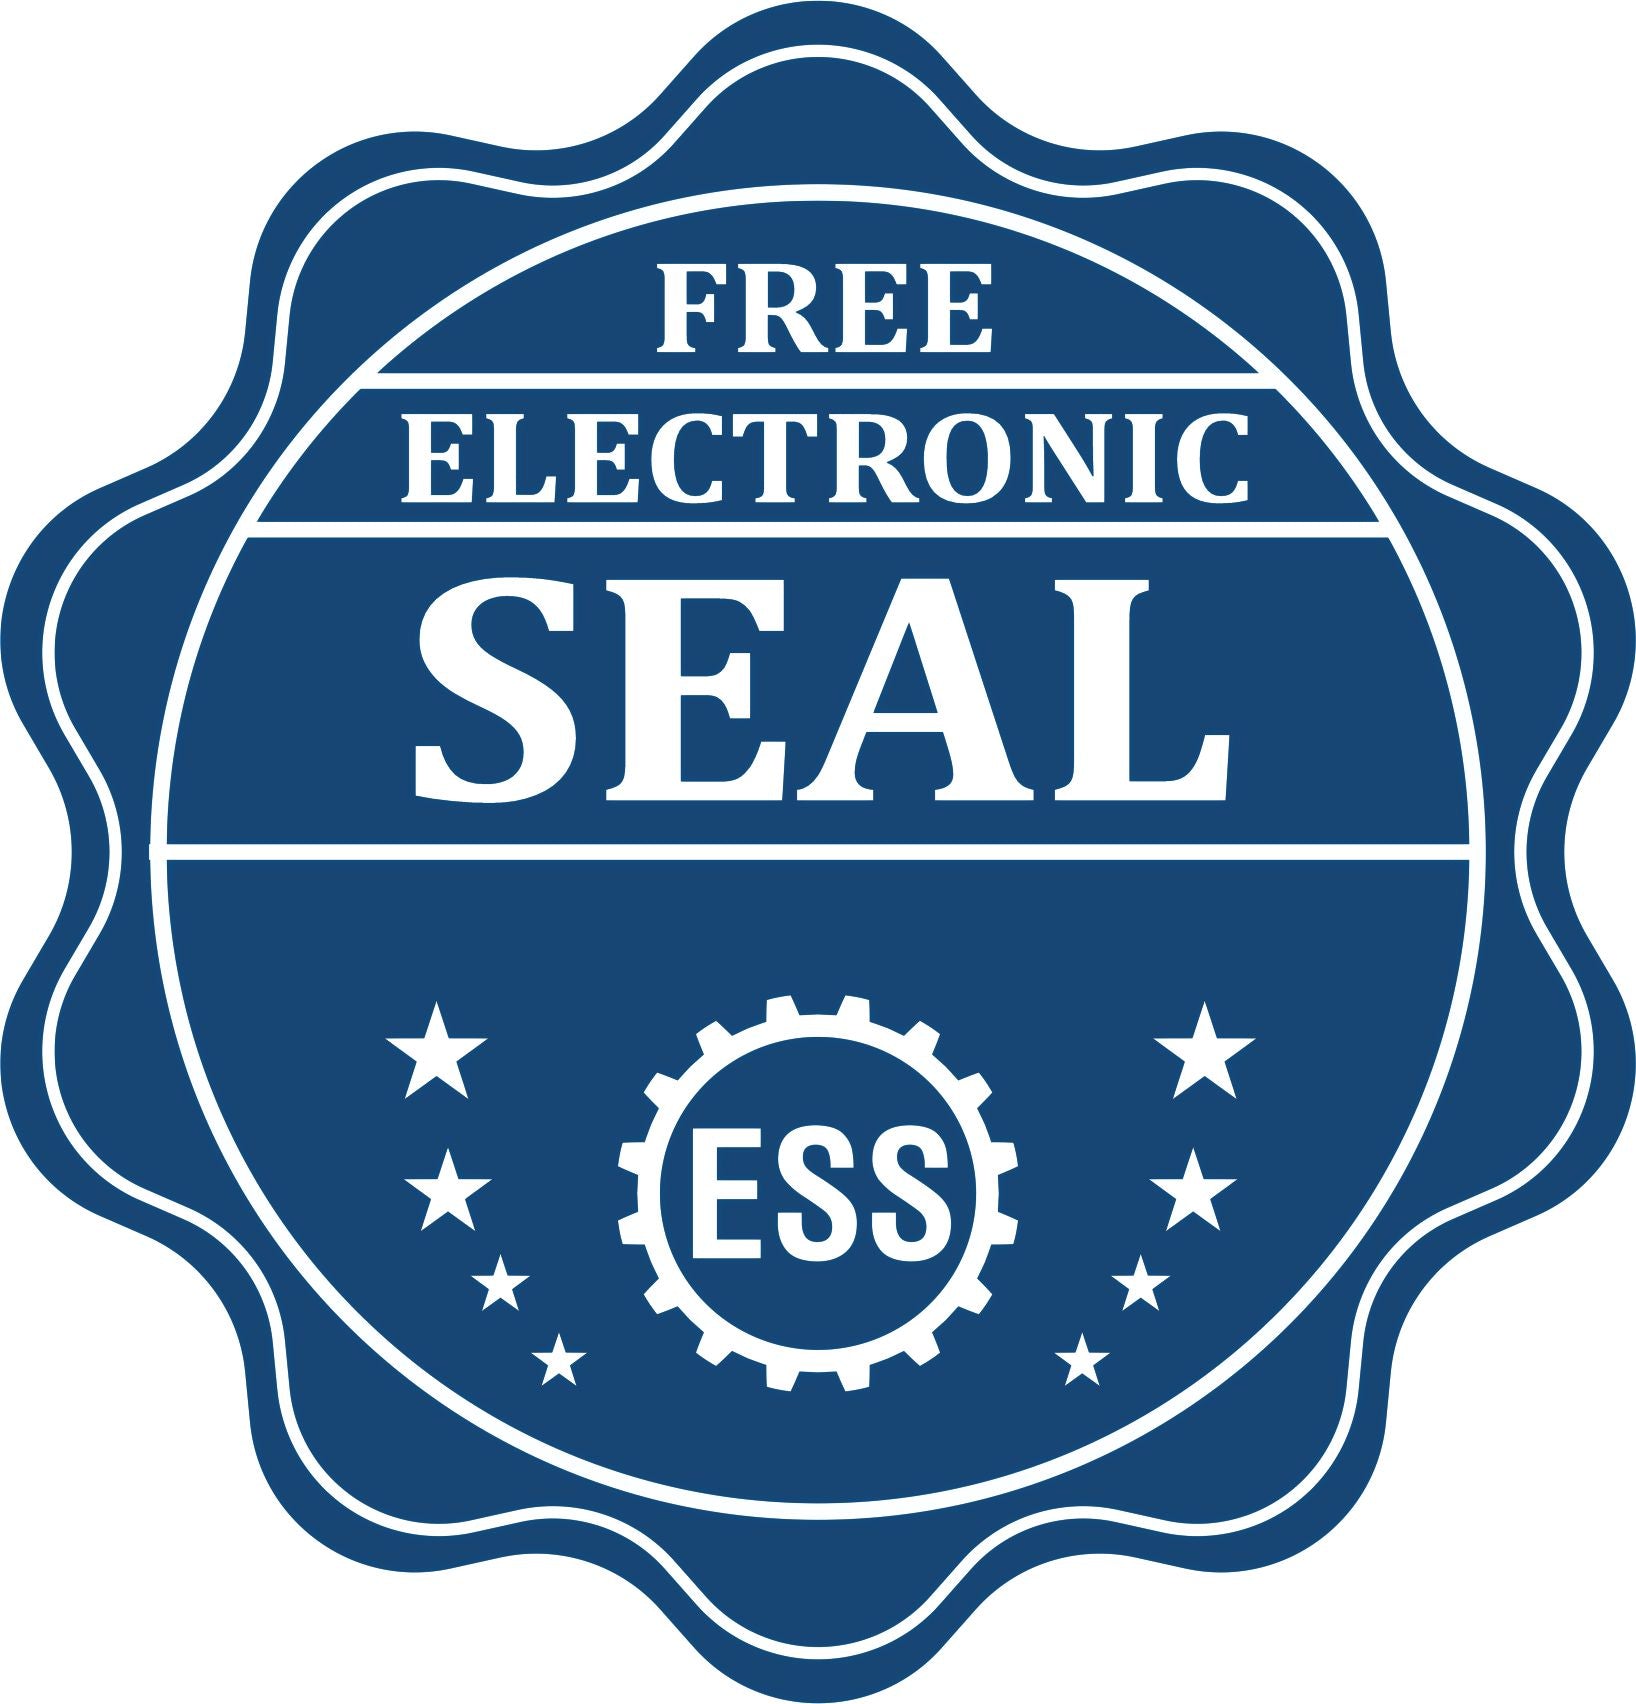 A badge showing a free electronic seal for the Gift Vermont Geologist Seal with stars and the ESS gear on the emblem.